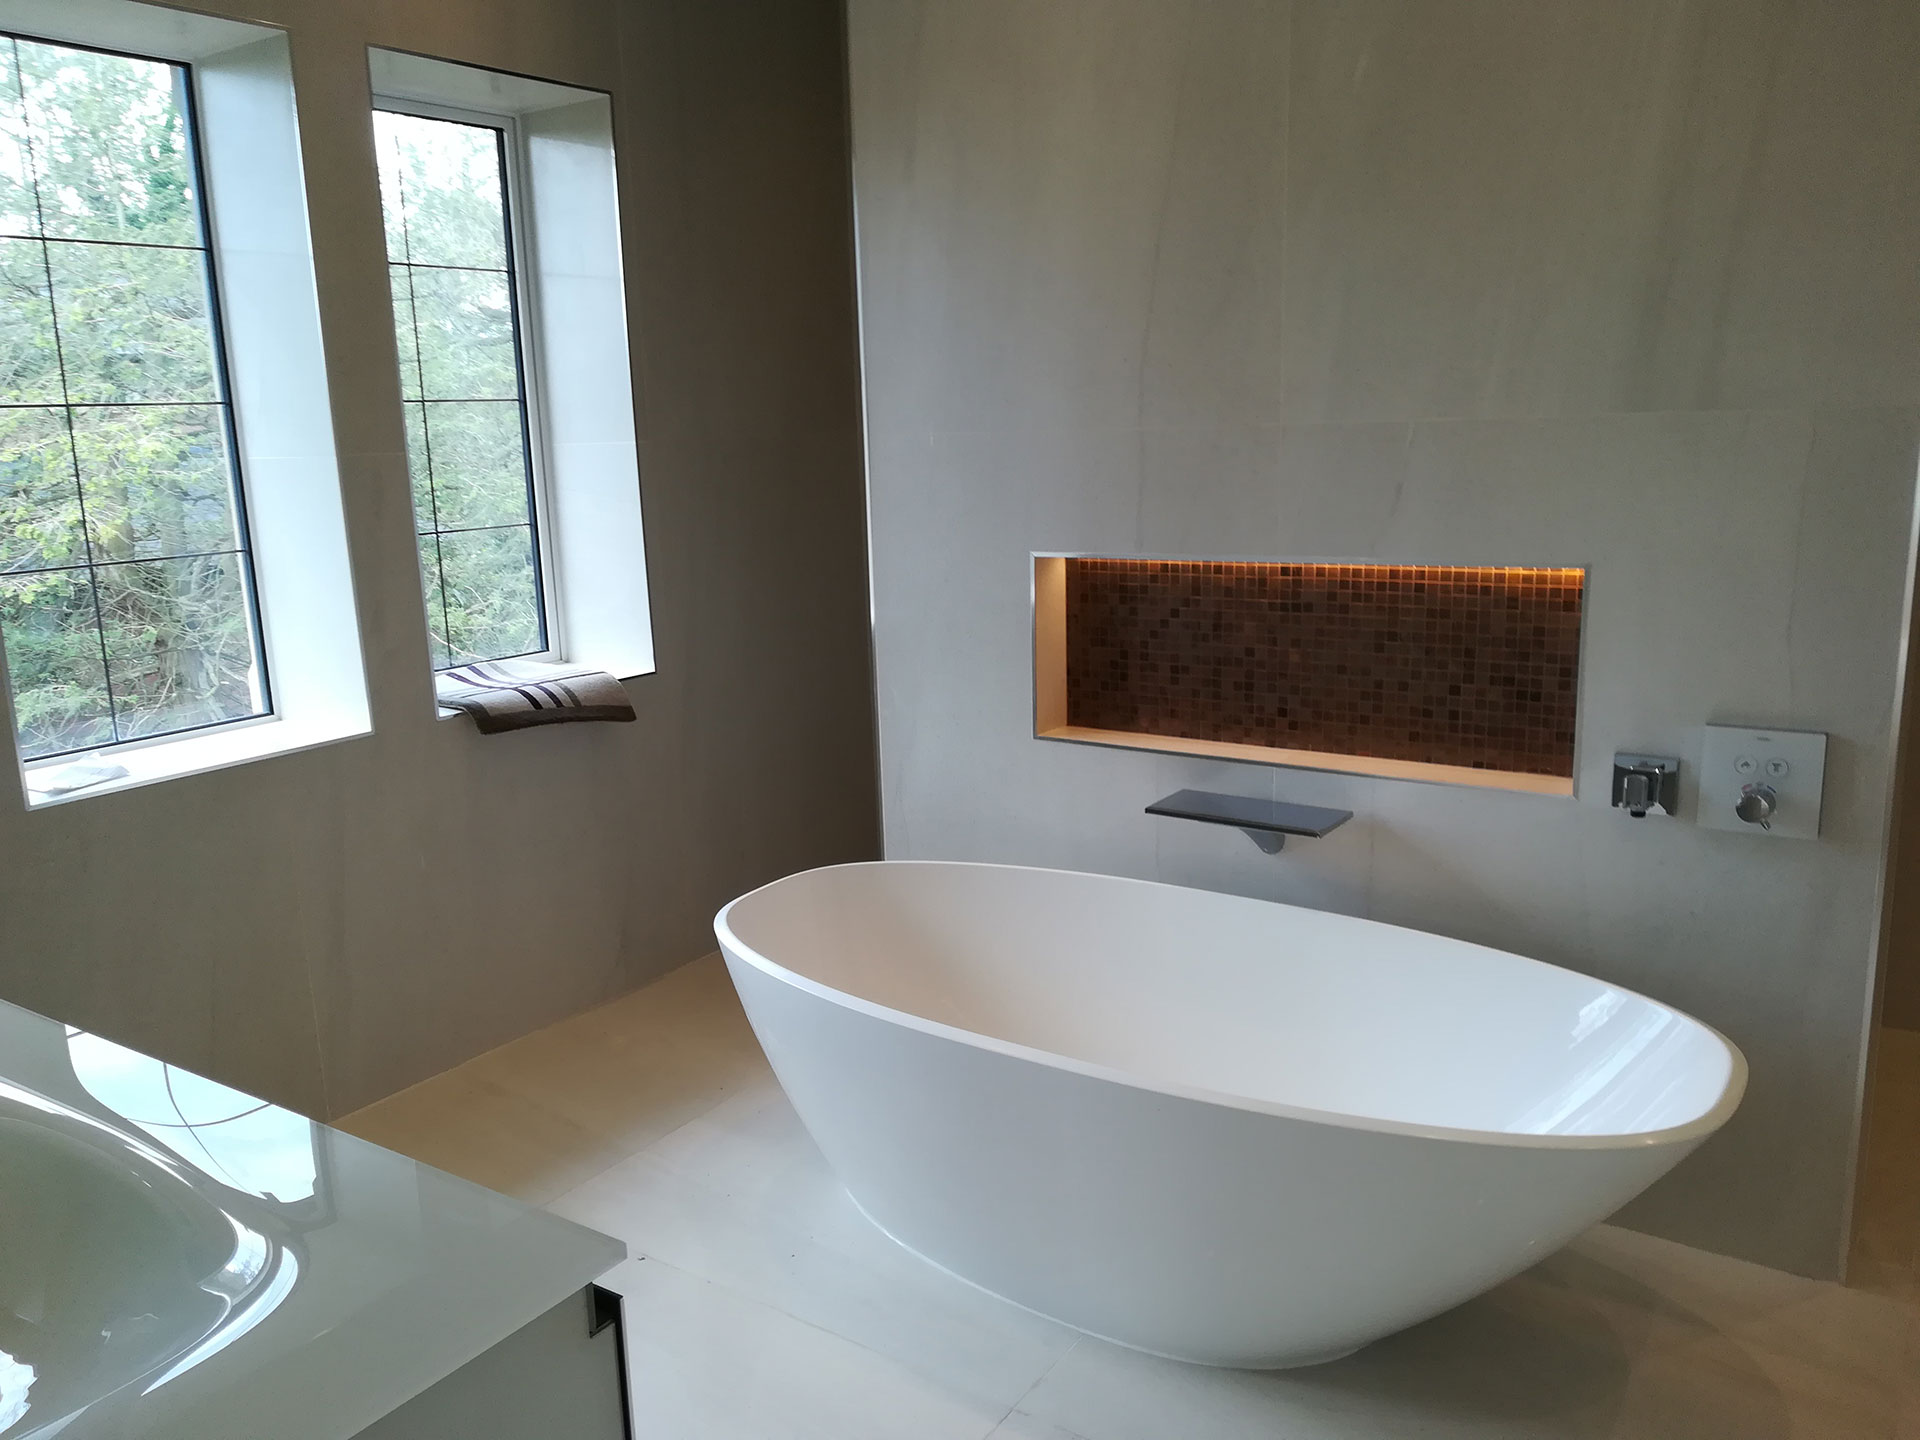 Penthouse bathroom from the Cheshire and South Manchester Extension and House Builder